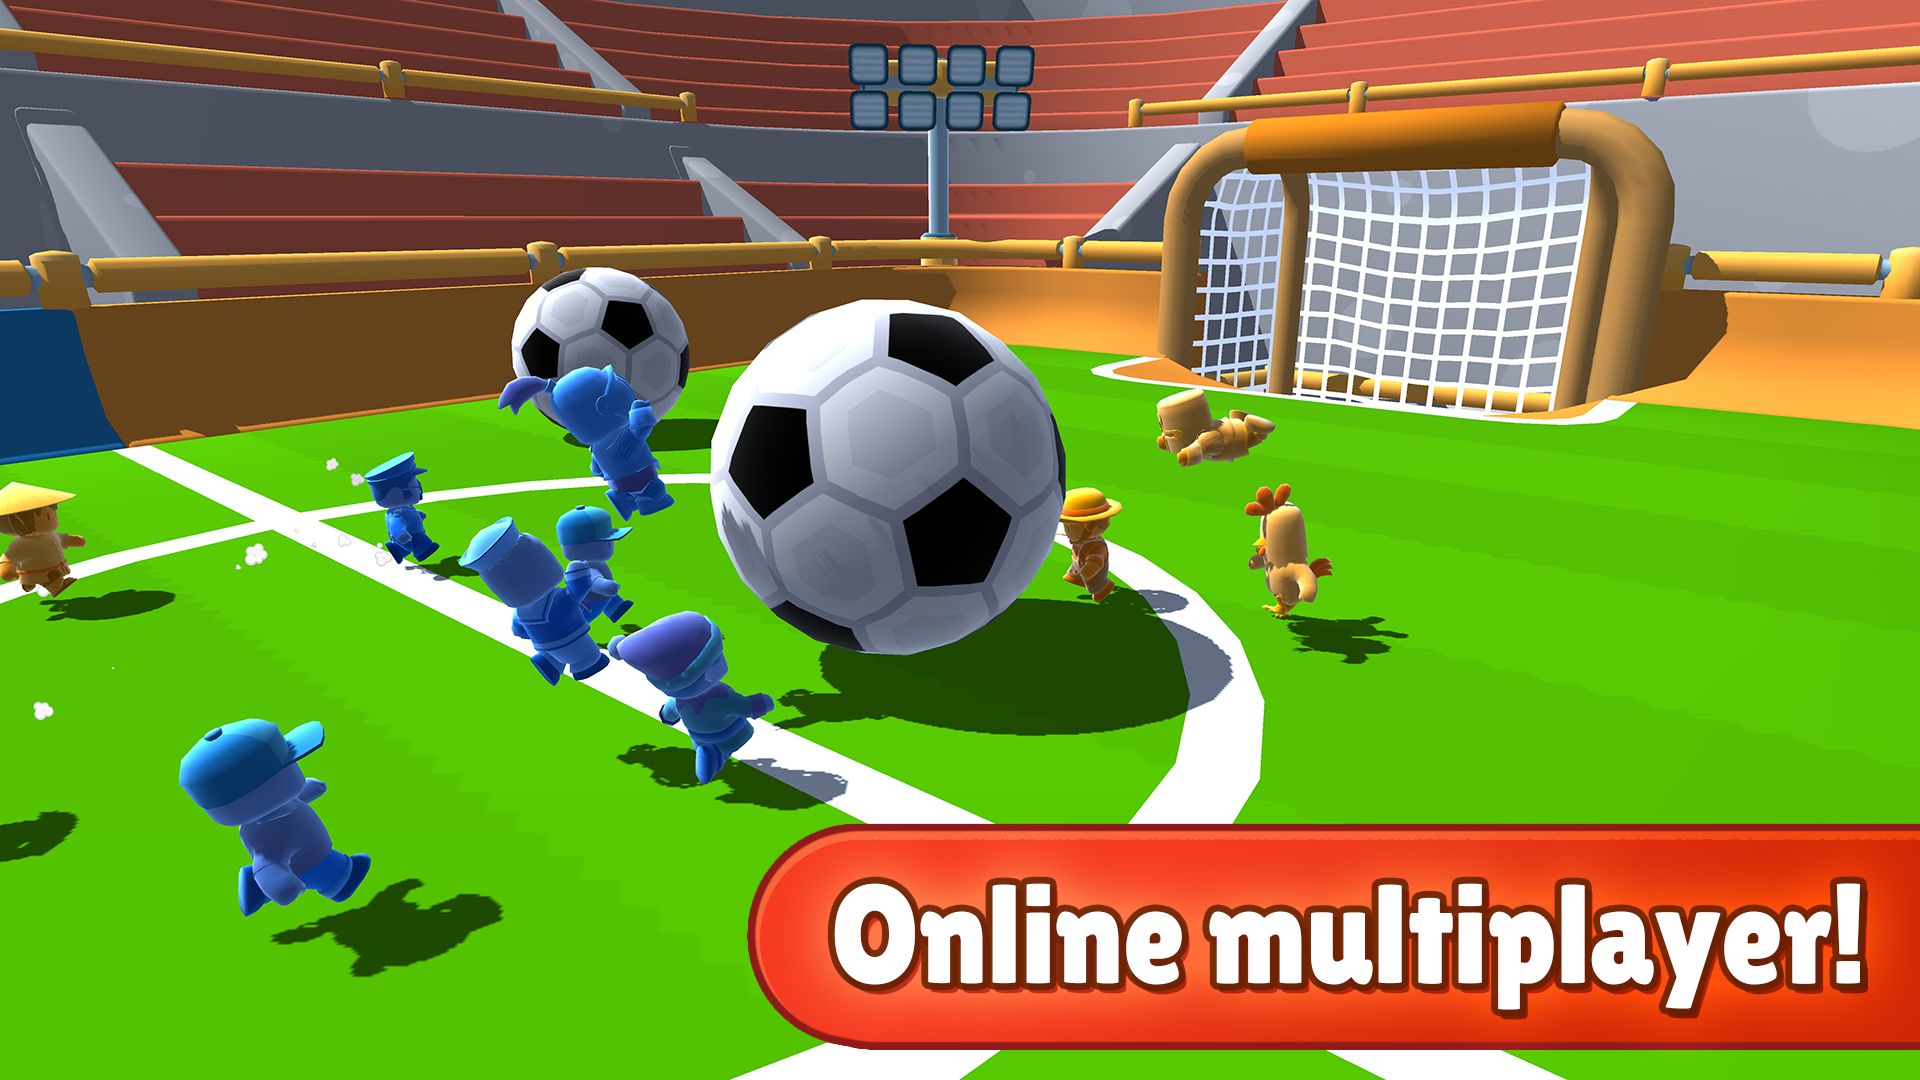 Download Stumble Guys: Multiplayer Royale Android free game.